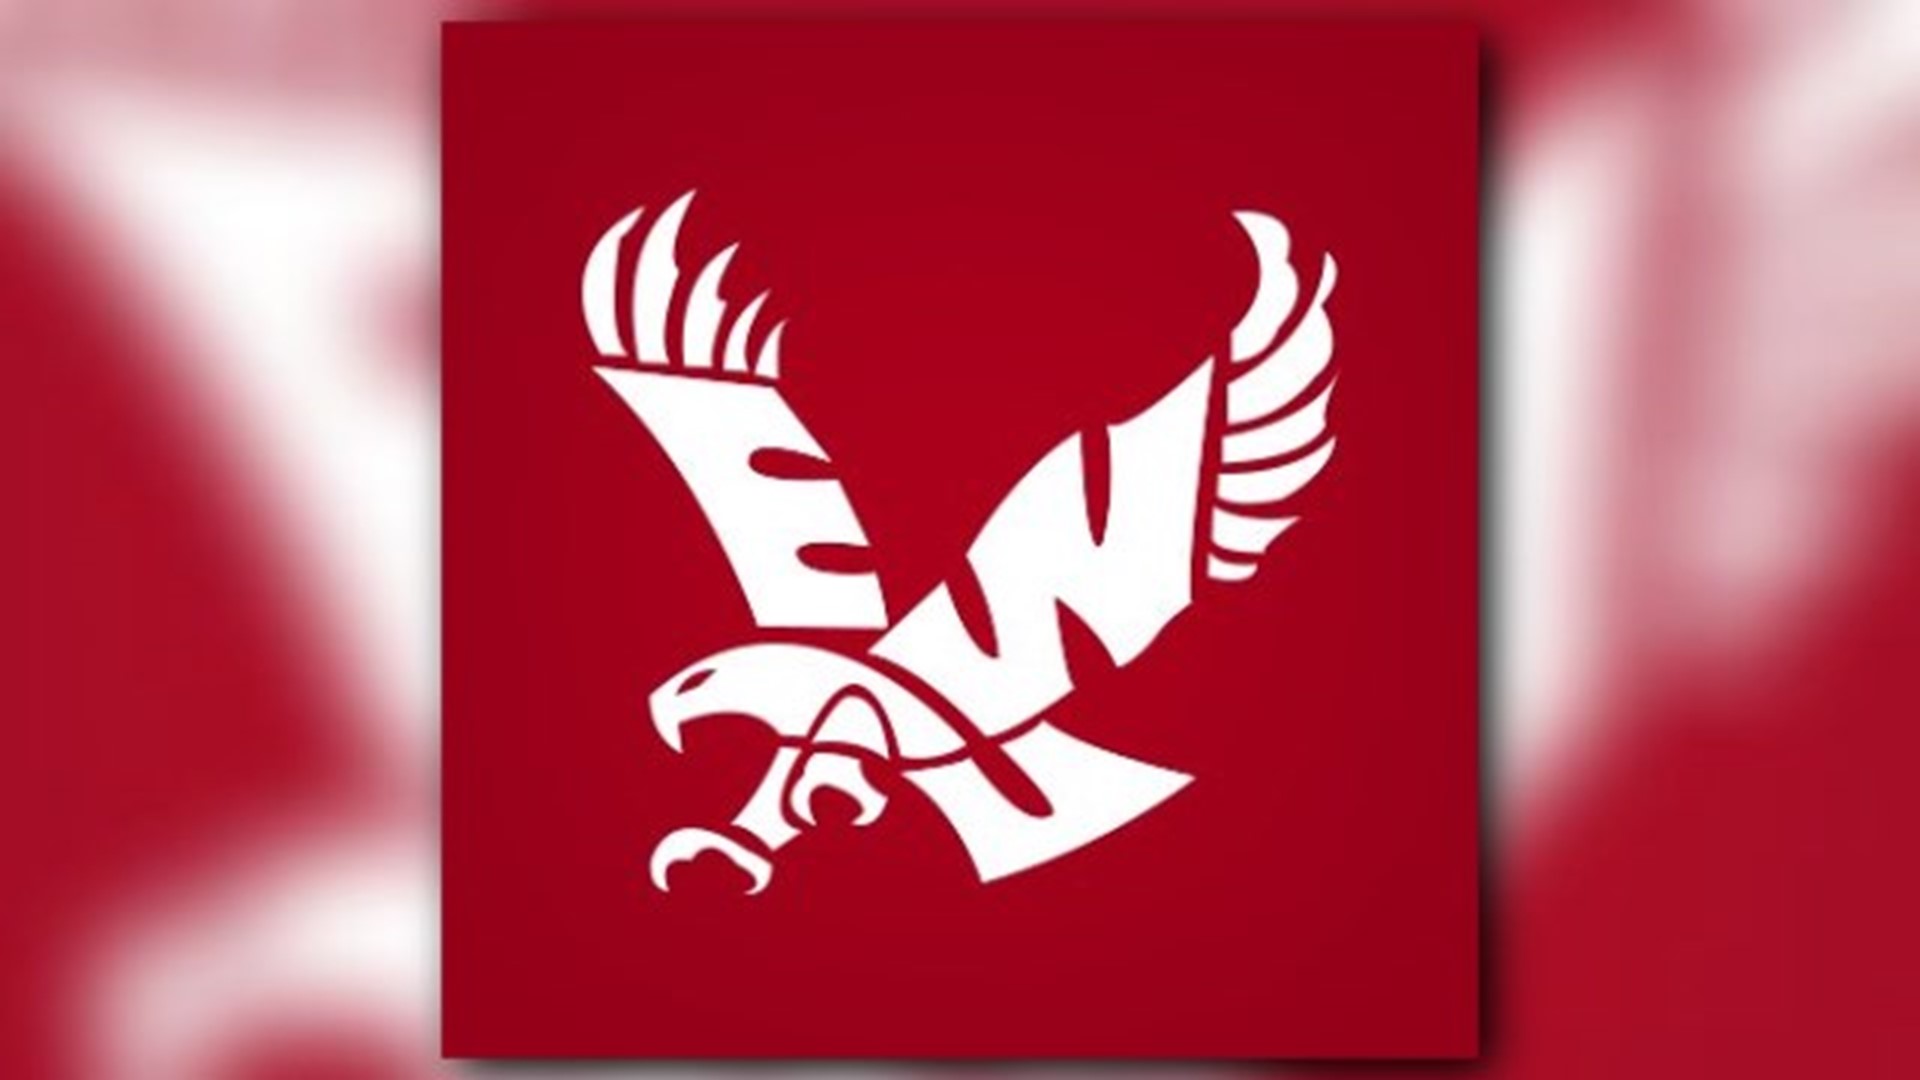 Dre Dorton surpassed Cooper Kupp's single-game receiving record and Eastern Washington outscore Division II Lindenwood 59-31.